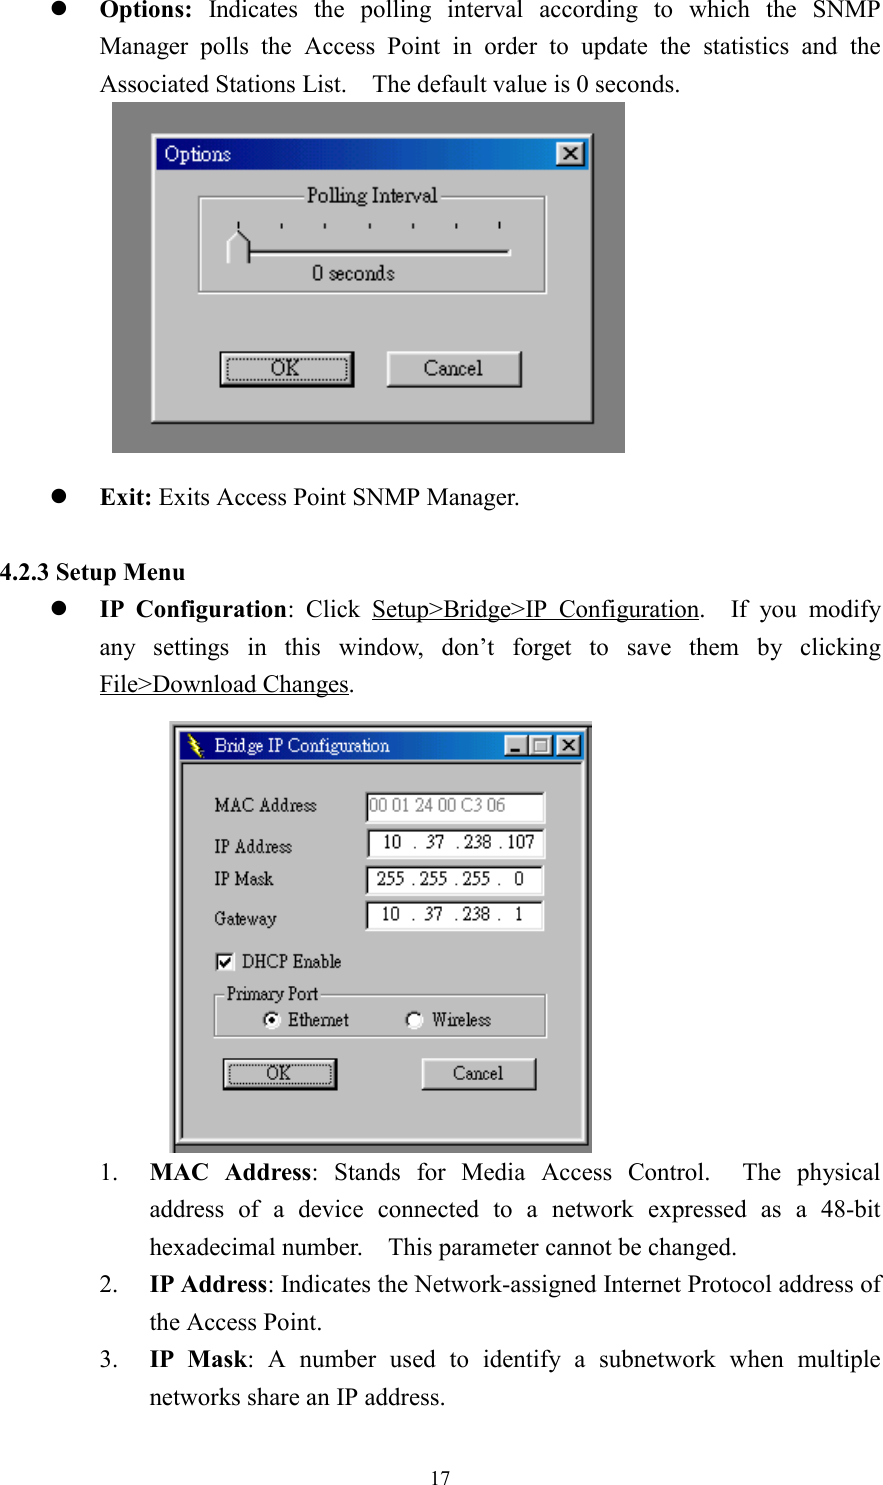 17z Options: Indicates the polling interval according to which the SNMPManager polls the Access Point in order to update the statistics and theAssociated Stations List.    The default value is 0 seconds.z Exit: Exits Access Point SNMP Manager.4.2.3 Setup Menuz IP Configuration: Click Setup&gt;Bridge&gt;IP Configuration.  If you modifyany settings in this window, don’t forget to save them by clickingFile&gt;Download Changes.1. MAC Address: Stands for Media Access Control.  The physicaladdress of a device connected to a network expressed as a 48-bithexadecimal number.    This parameter cannot be changed.2. IP Address: Indicates the Network-assigned Internet Protocol address ofthe Access Point.3. IP Mask: A number used to identify a subnetwork when multiplenetworks share an IP address.